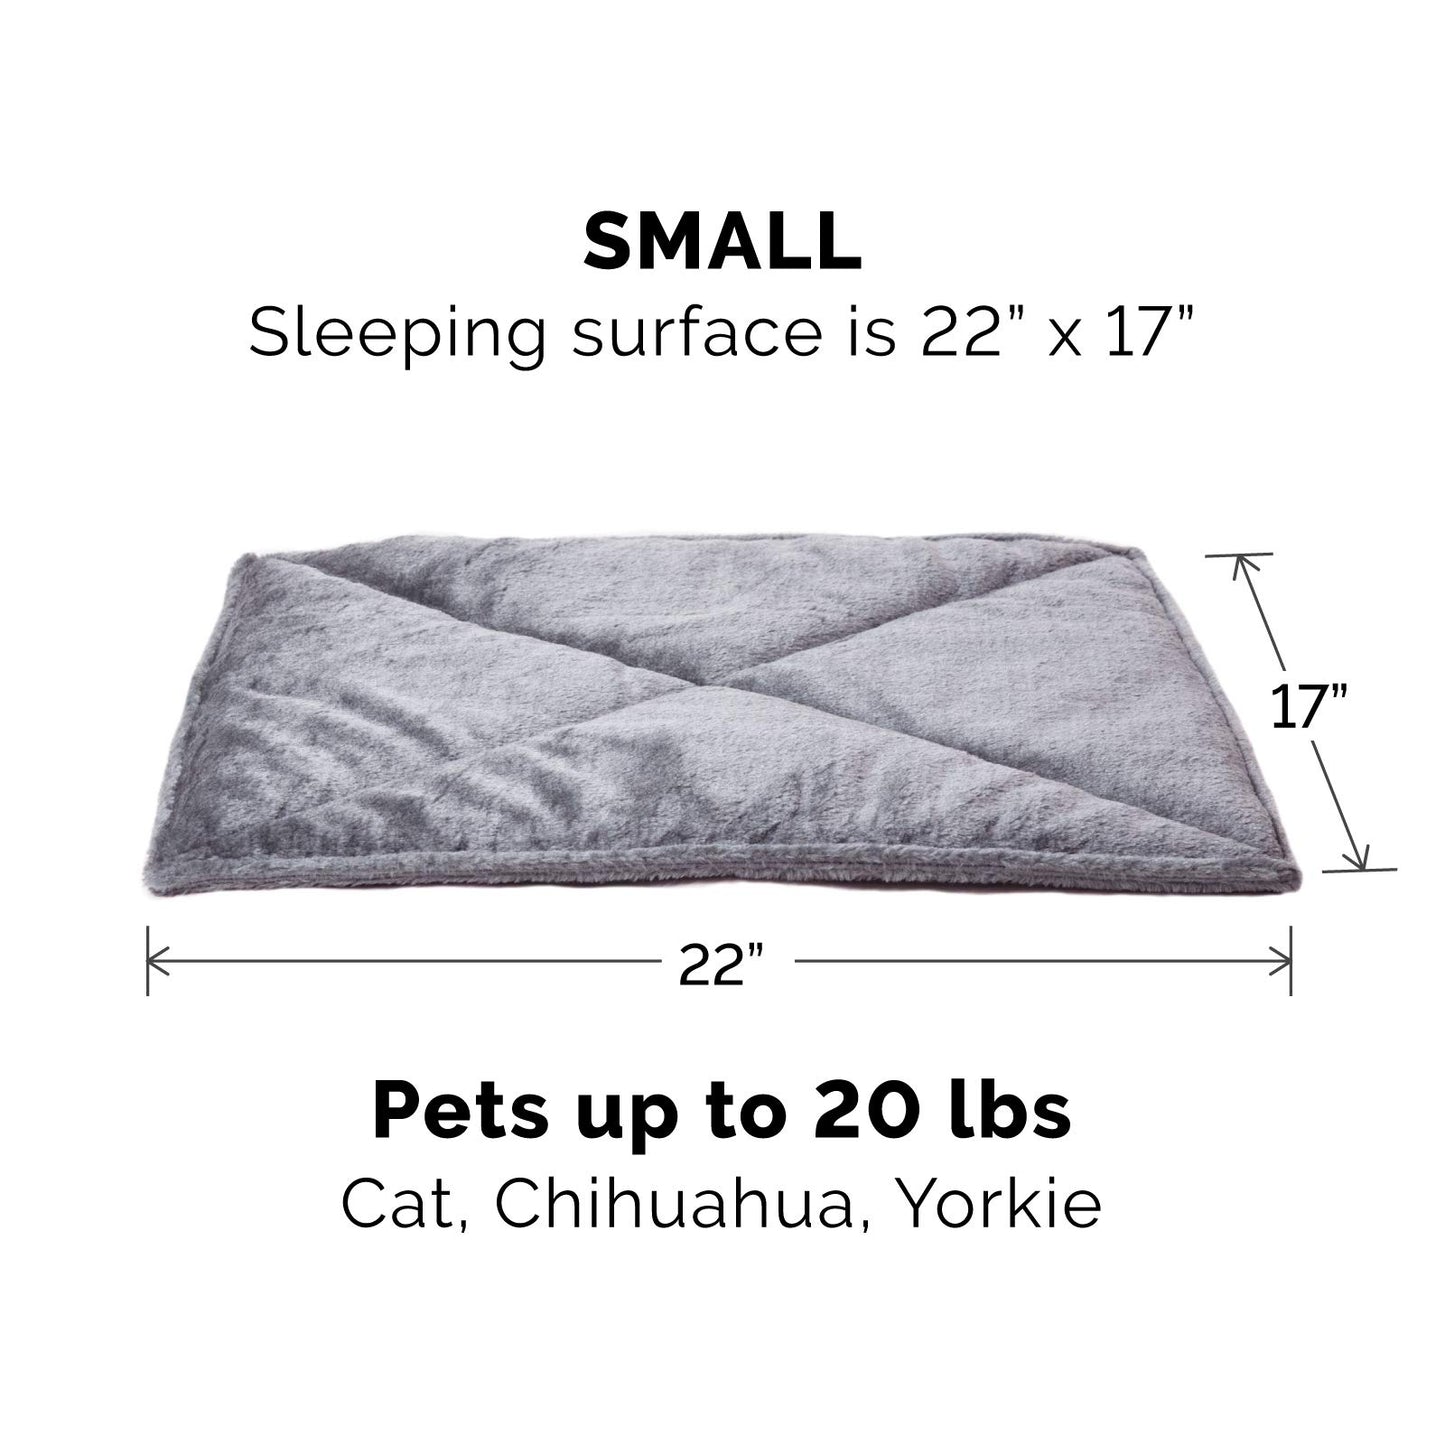 Furhaven ThermaNAP Self-Warming Cat Bed for Indoor Cats & Small Dogs, Washable & Reflects Body Heat - Quilted Faux Fur Reflective Bed Mat - Gray, Small